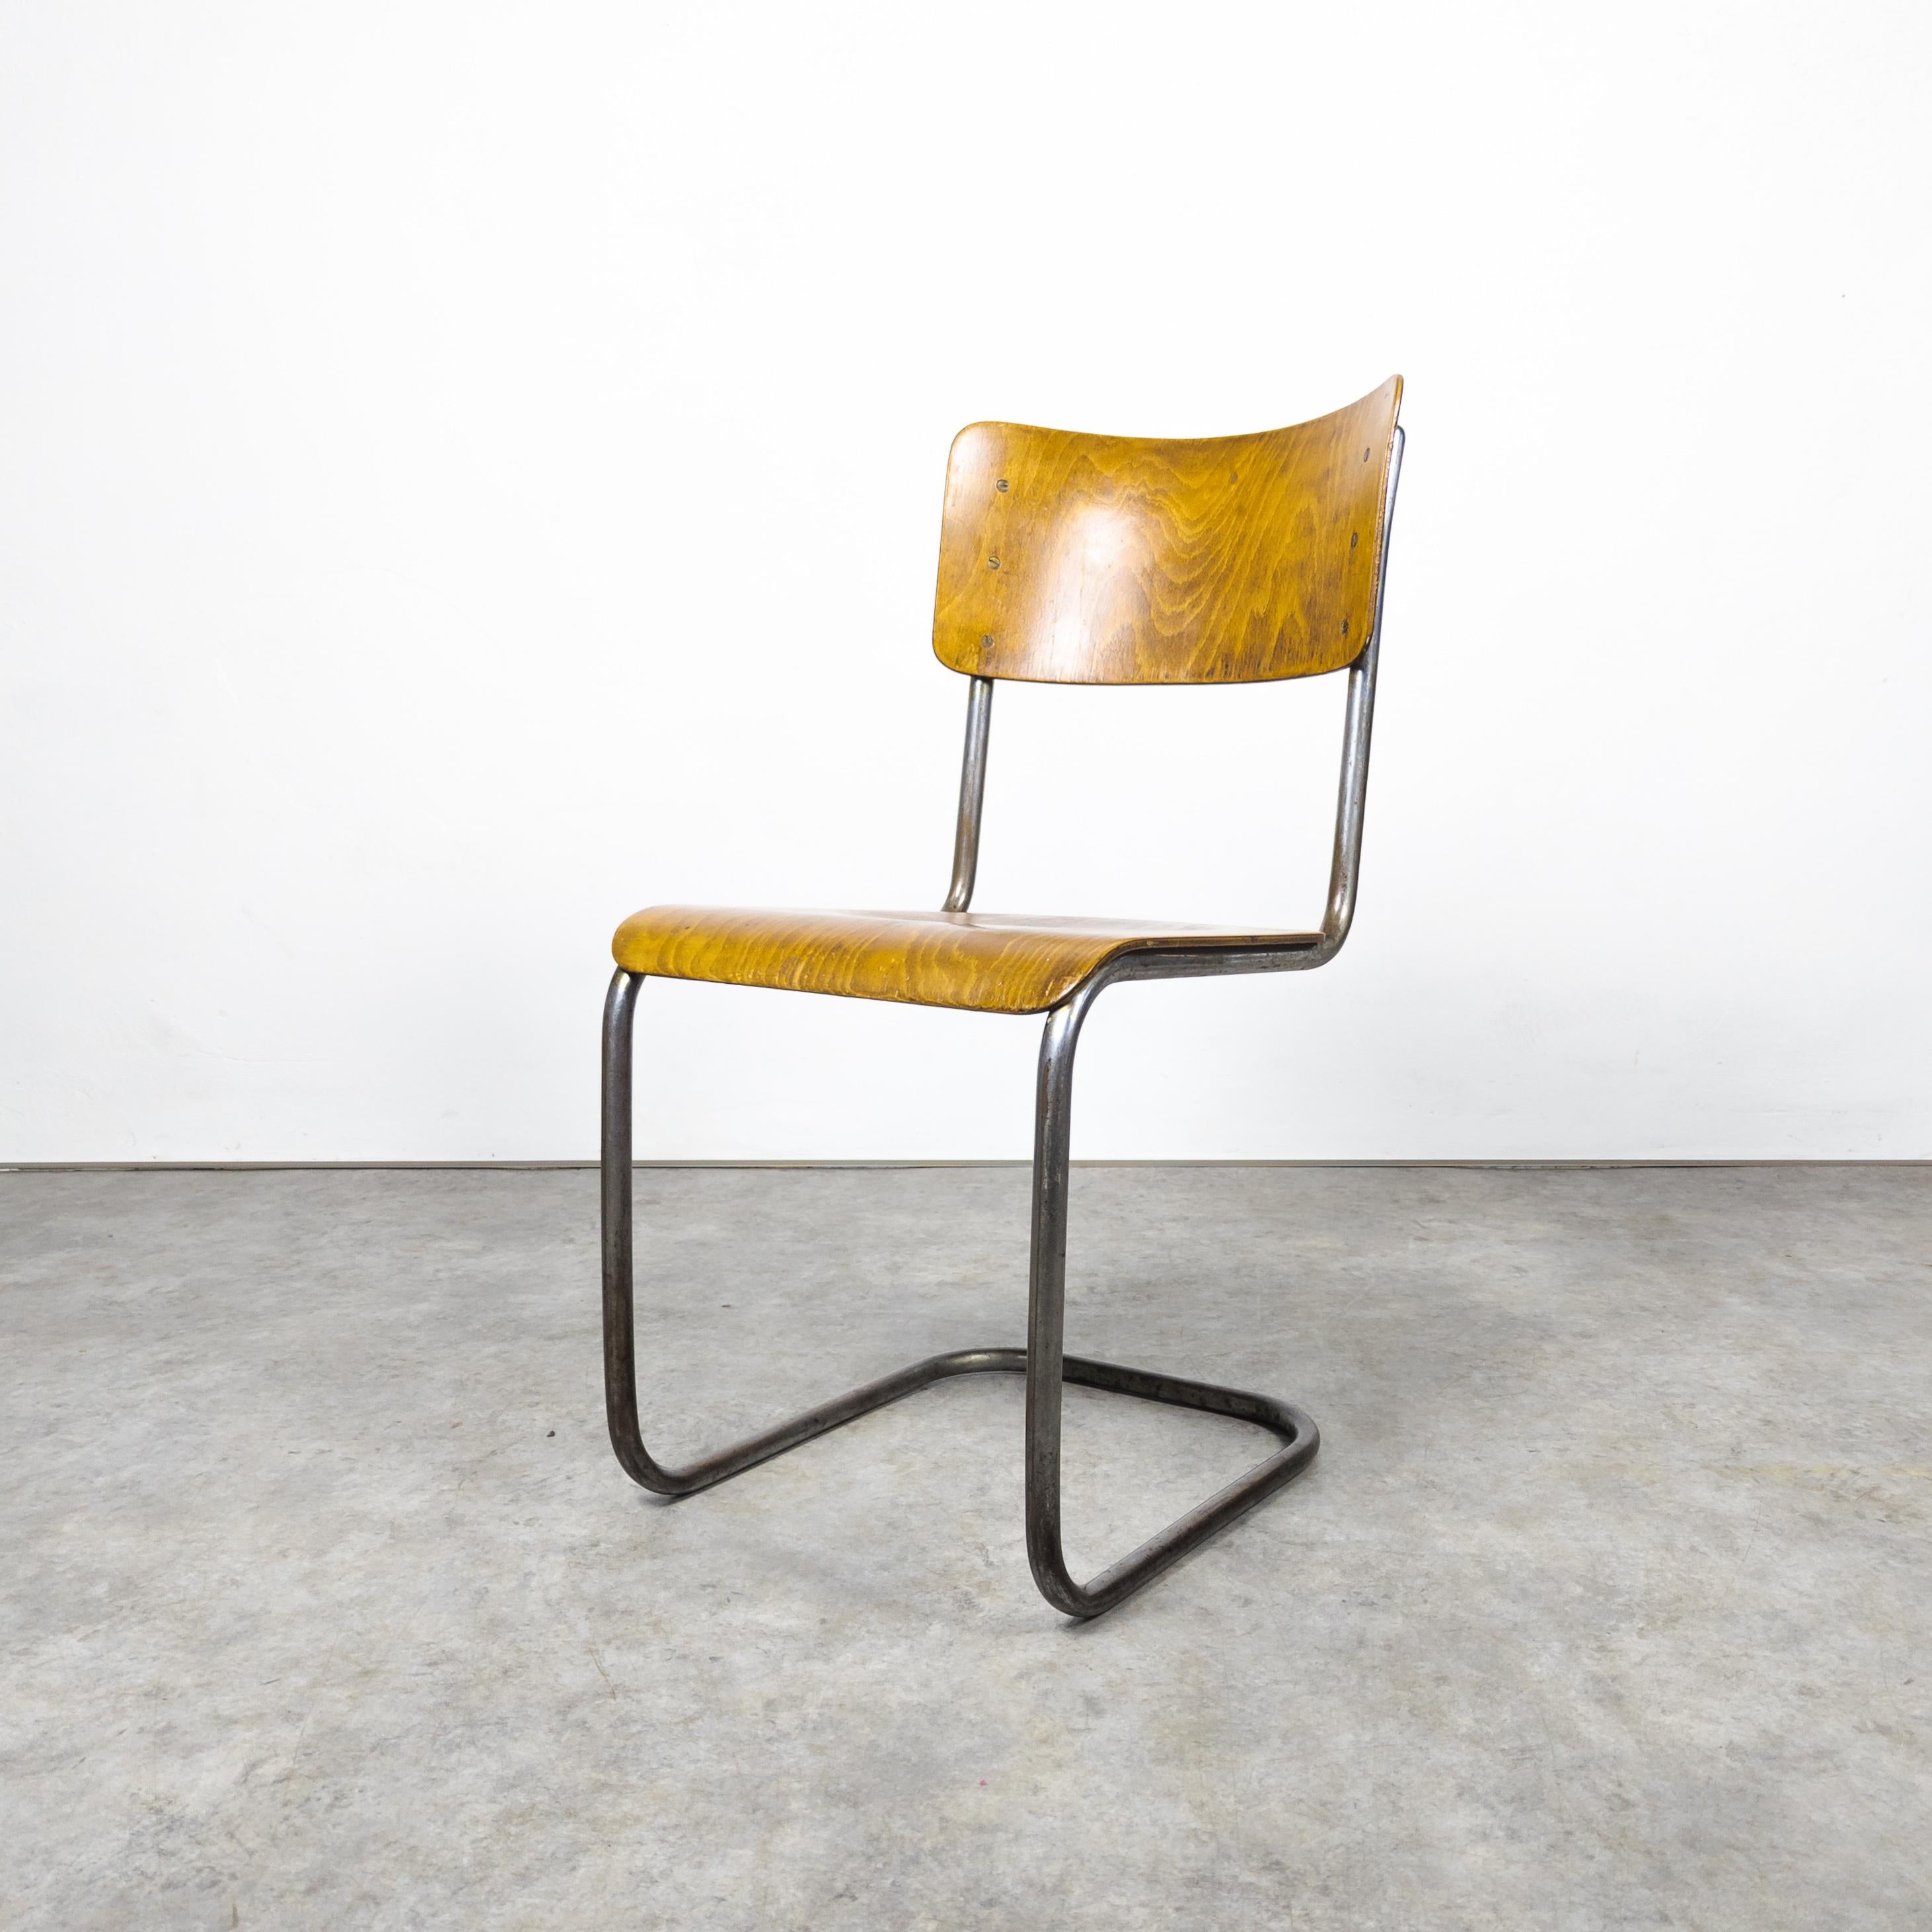 Rare early version of famous tubular steel chair manufactured by Vichr & co. , former Czechoslovakia in the 1930s. Bauhaus cantilever chair with a sturdy tubular steel frame, showcasing vintage charm. The steel elements exhibit distinct and lovely